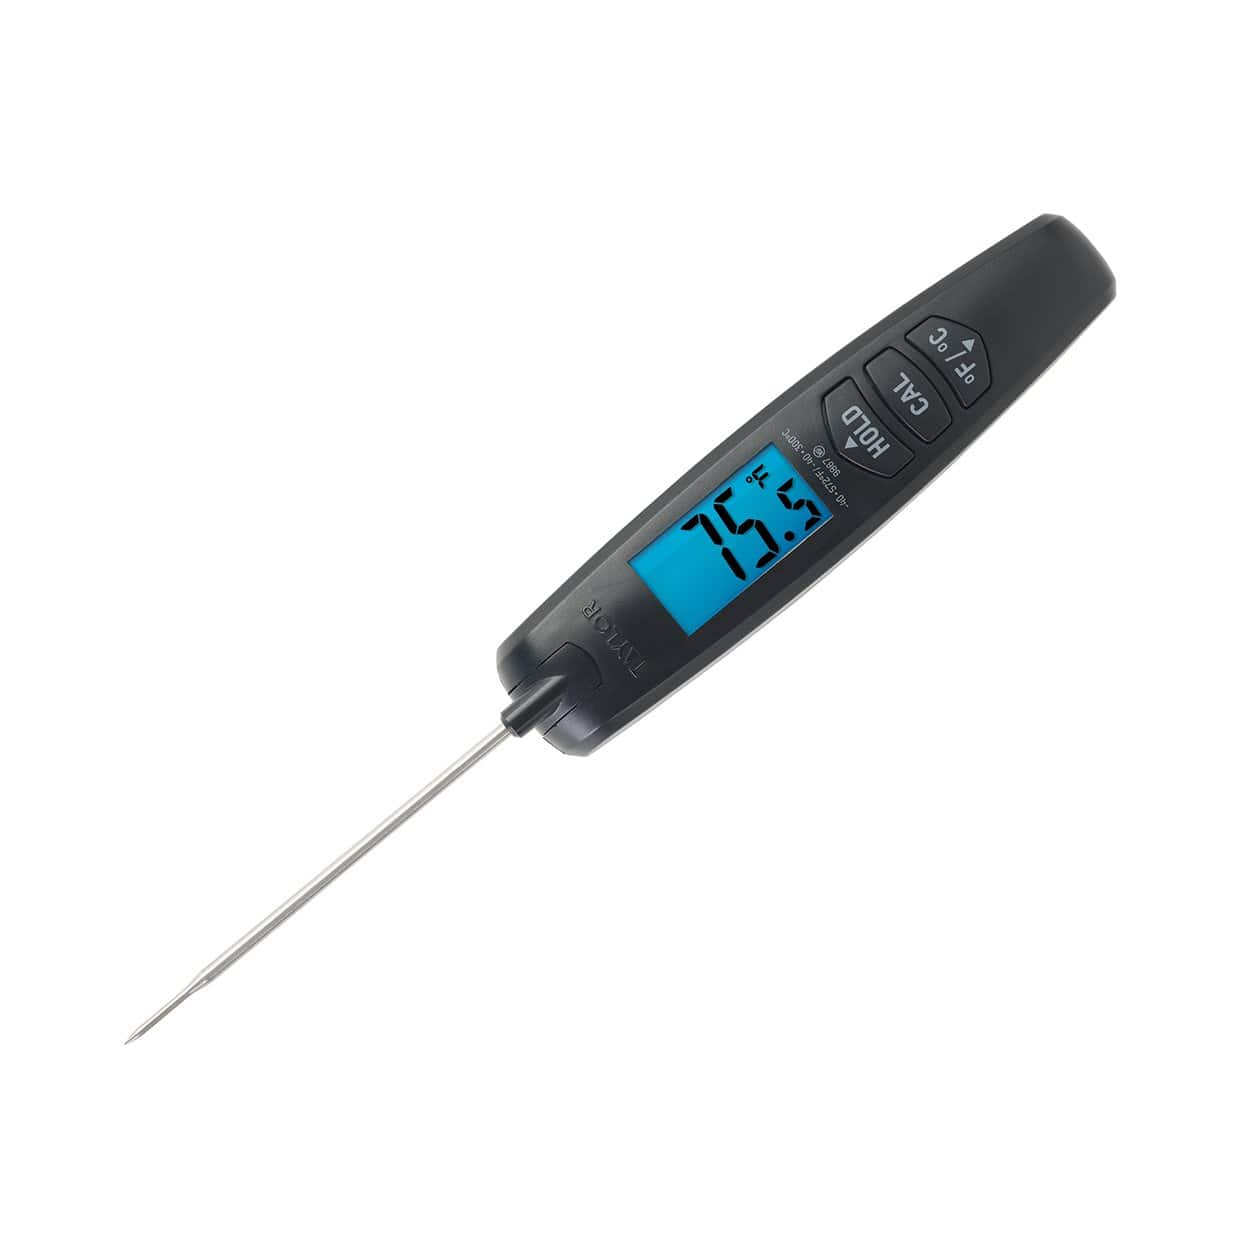 Taylor PRO Digital Turbo Read Thermocouple Thermometer